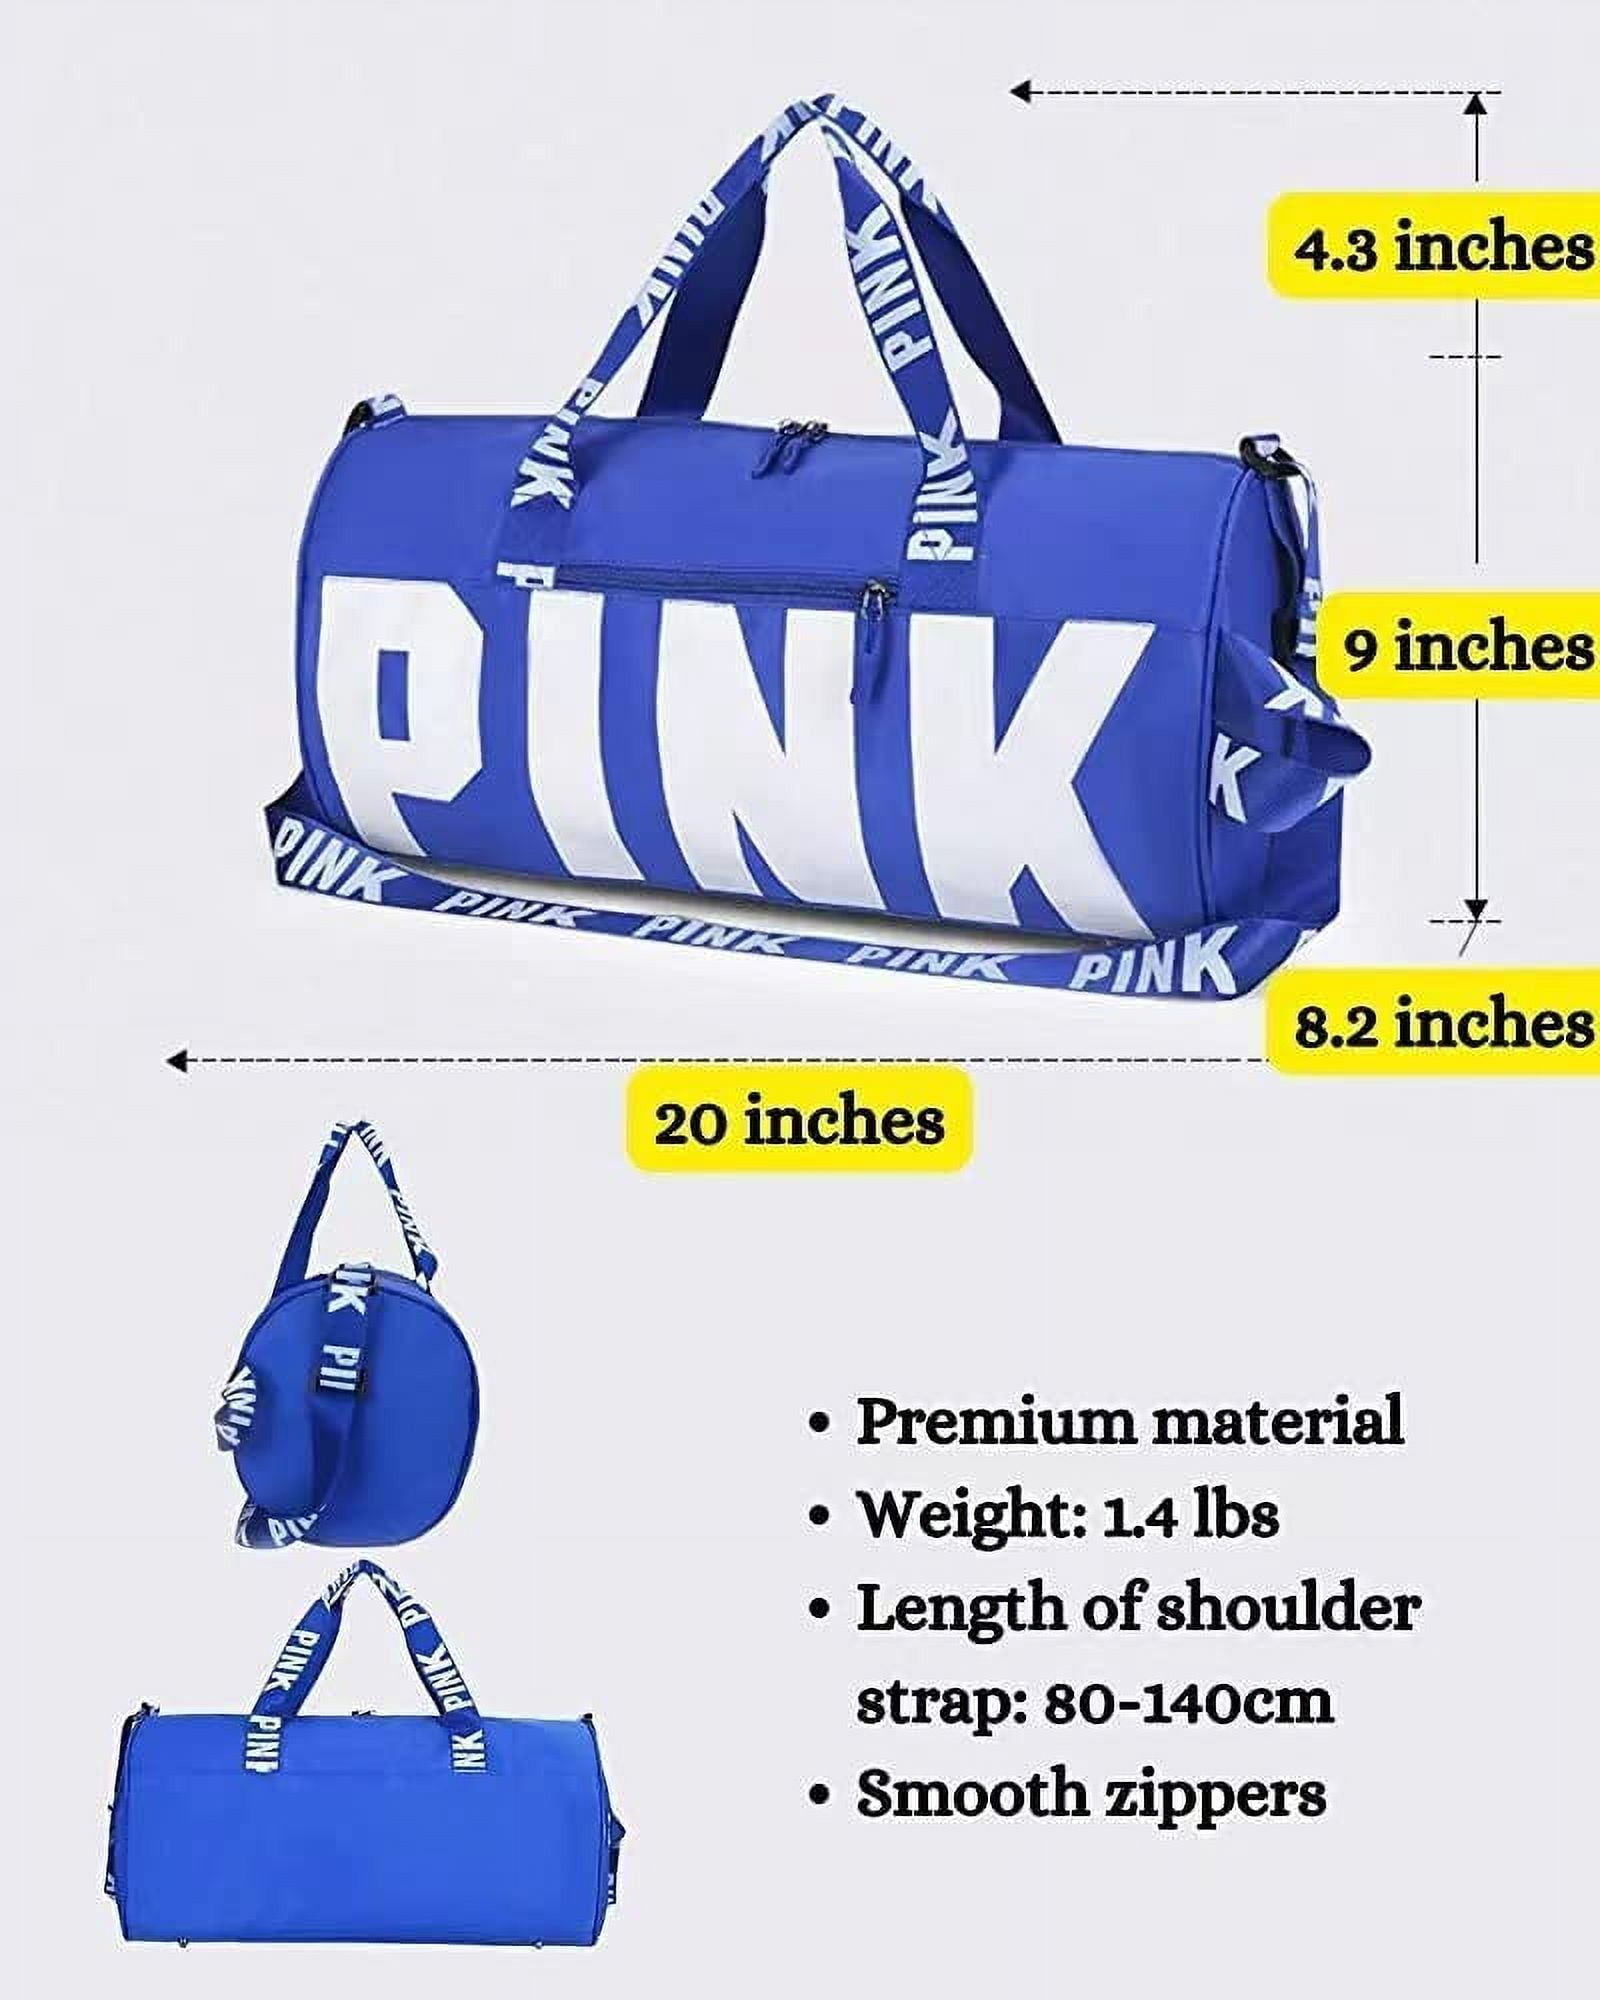 Sexy Dance Checkered Duffel Bag for Women Men Travel Overnight Bag Tote  Carry On Weekender Bag Sports Gym Bags 